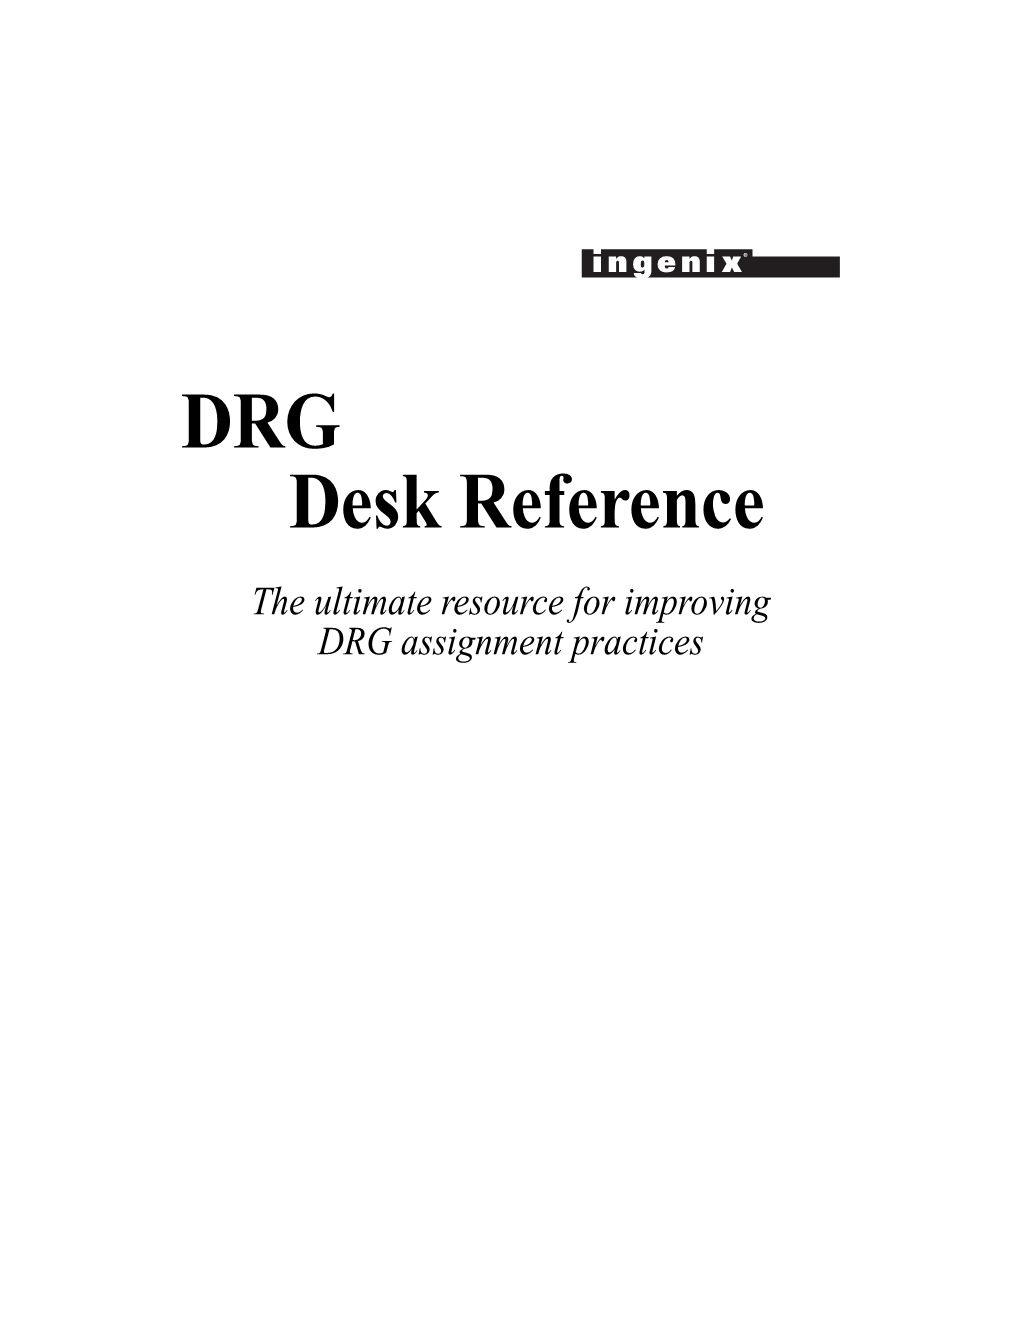 DRG Desk Reference the Ultimate Resource for Improving DRG Assignment Practices